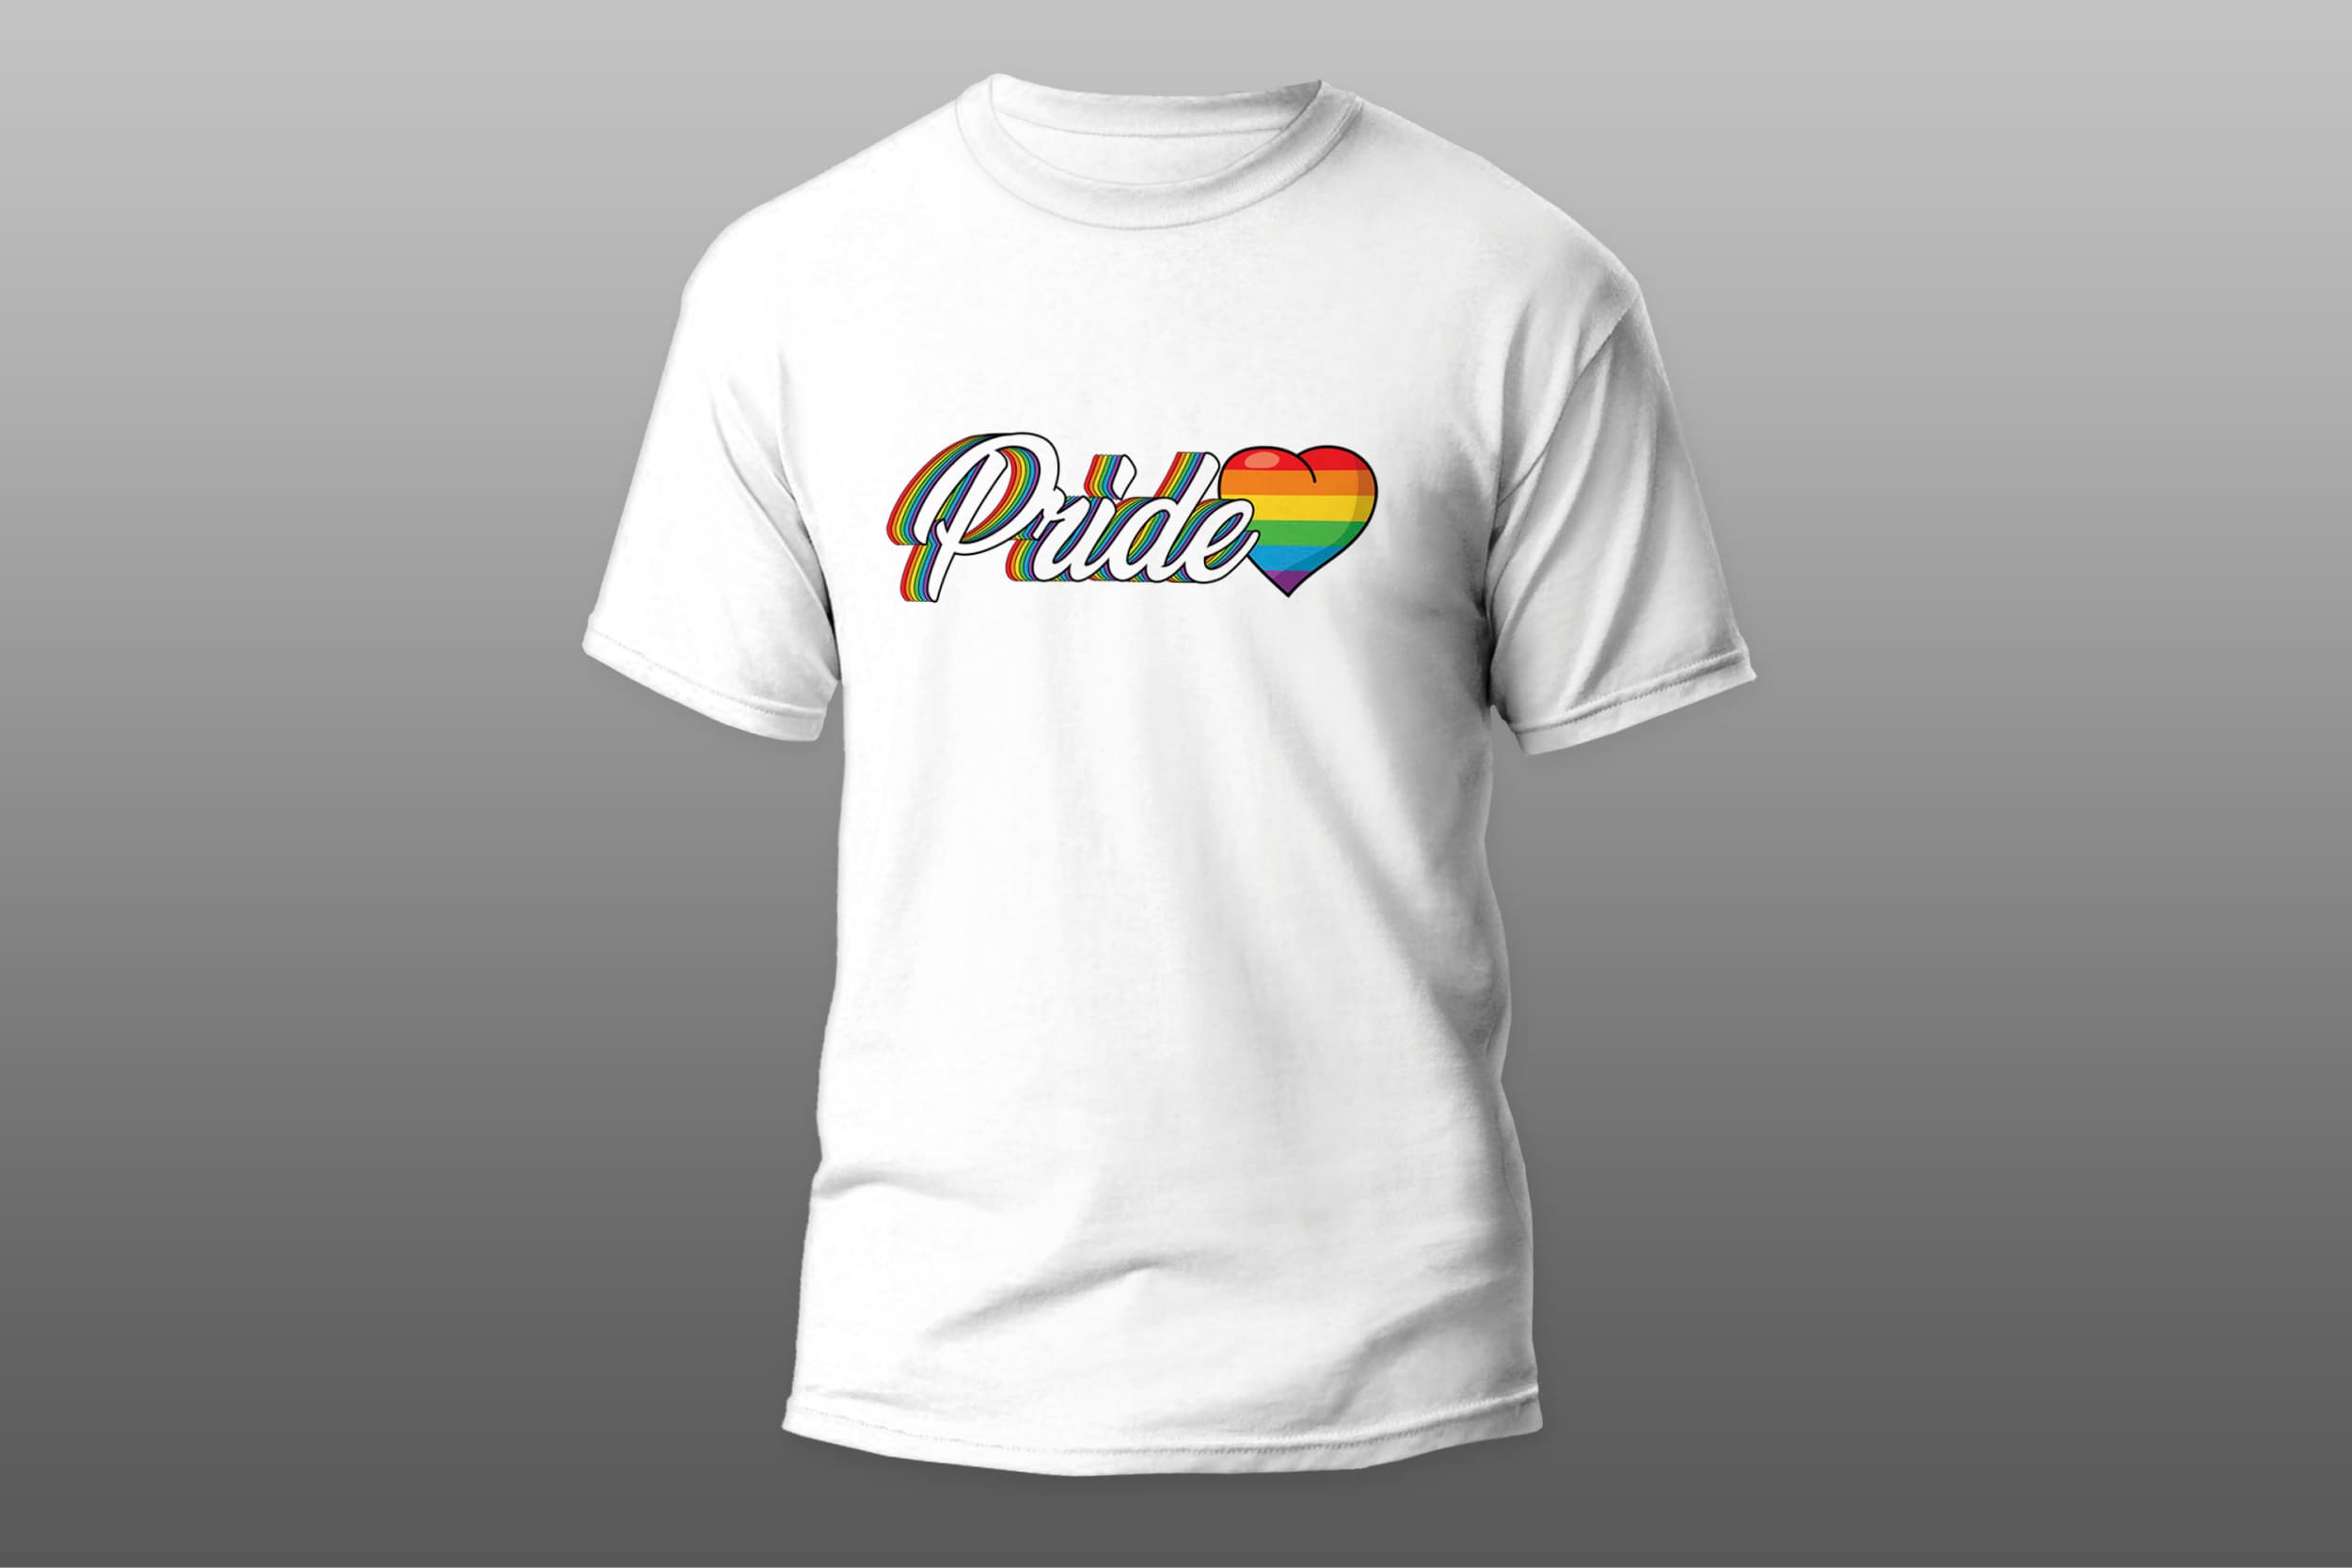 White t-shirt with a white "Pride" lettering and a heart in the colors of the LGBT flag on a gray background.